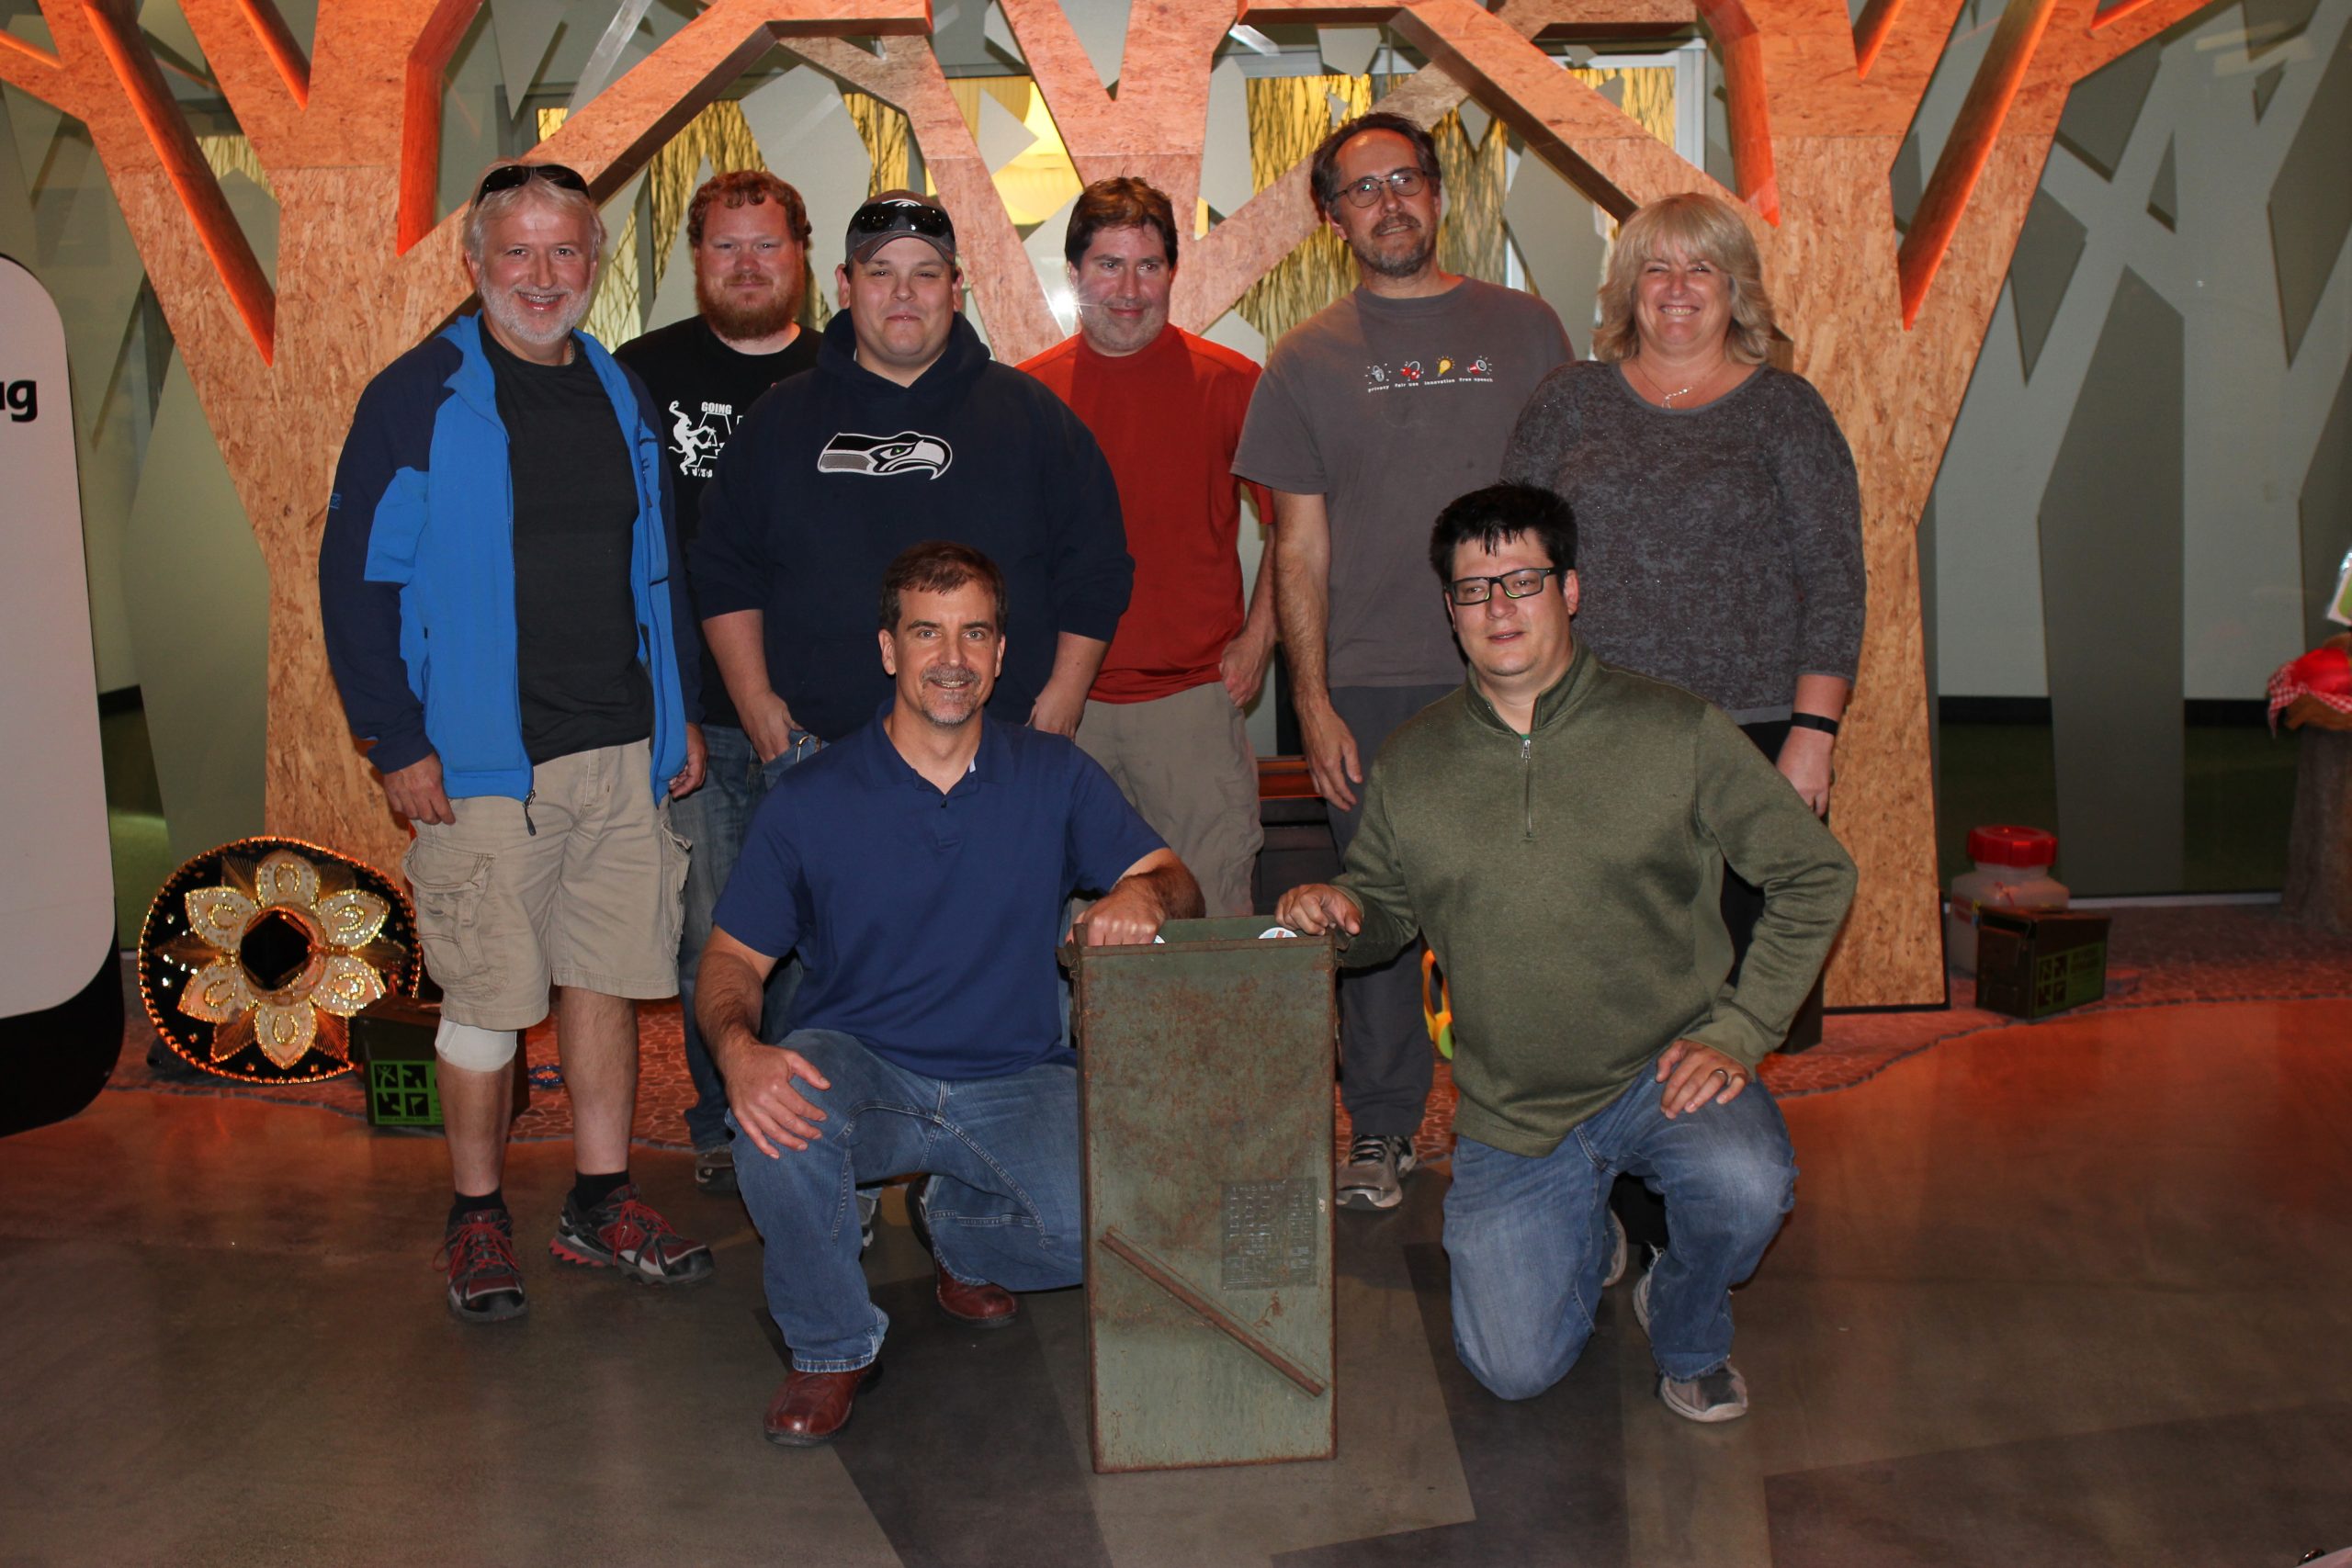 Several members of the search party at Geocaching HQ. Photo by Love.